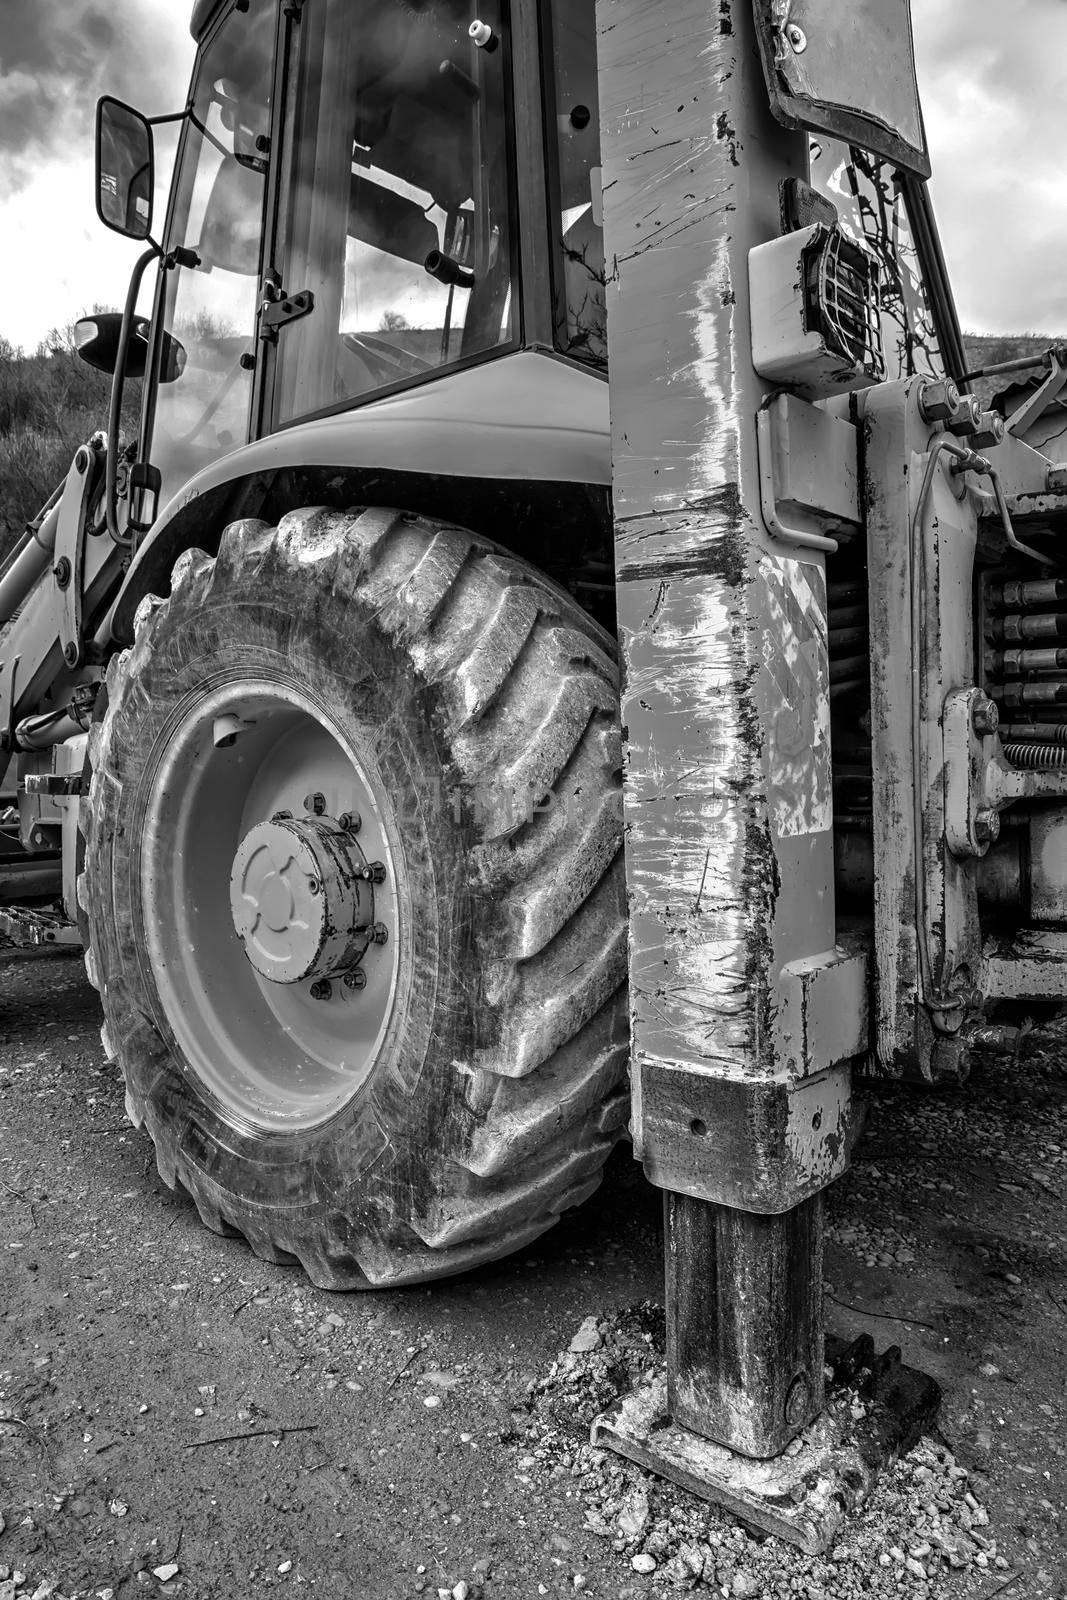 Part of excavator machines in black and white. Vertical view